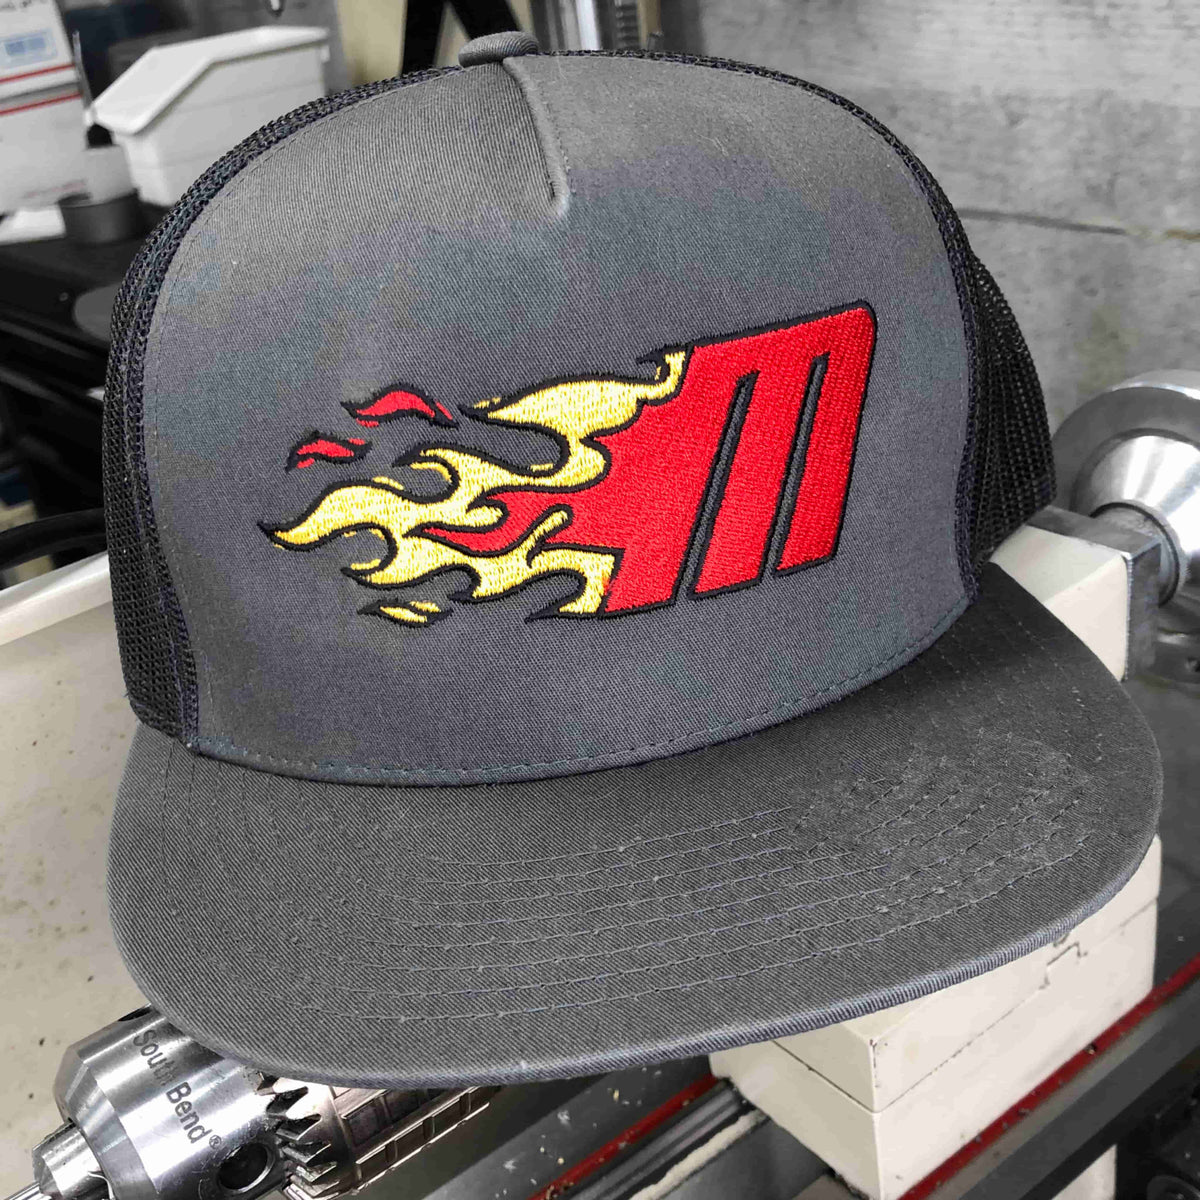 Photo of Miller Machine 5 panel trucker cap with a Flaming M in red and yellow. Cap is a grey color.